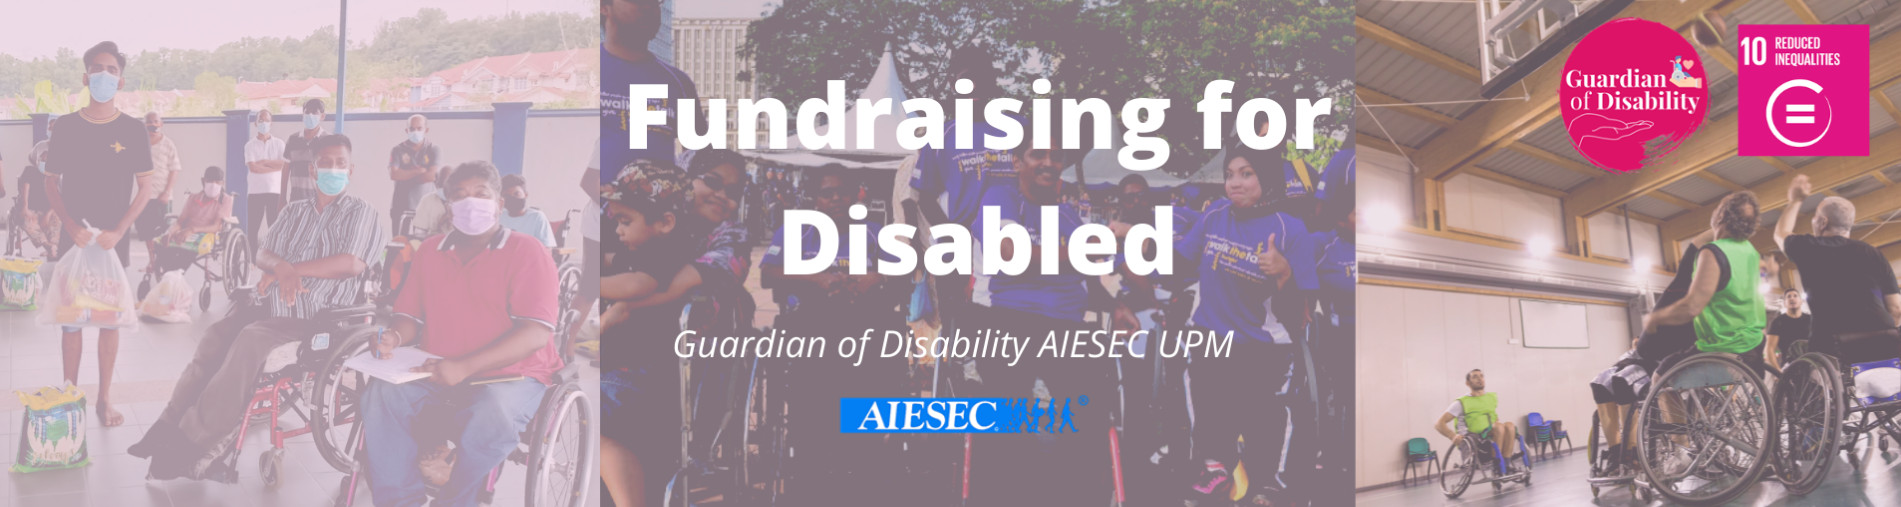 Fundraising for disabled